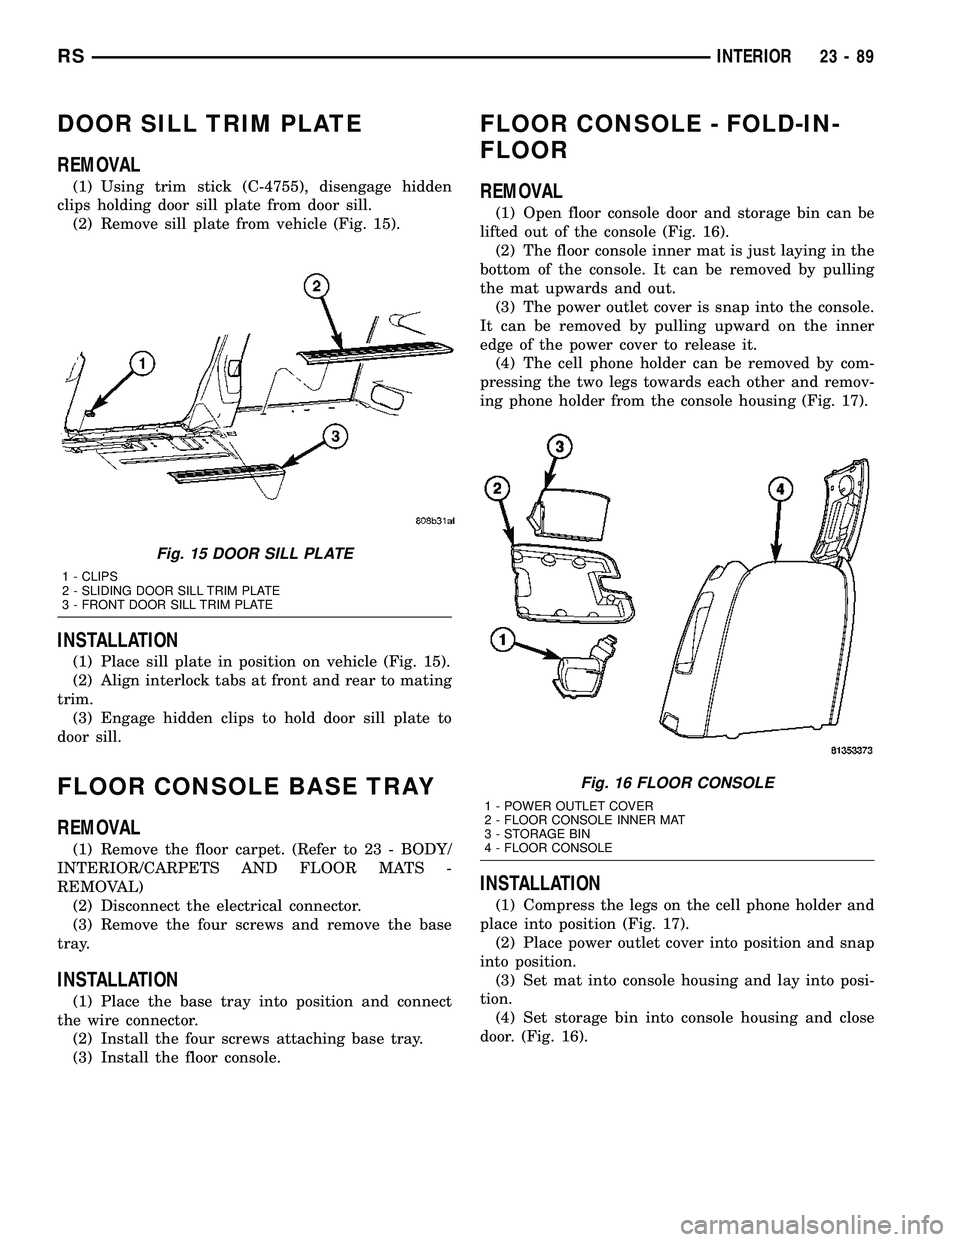 CHRYSLER VOYAGER 2005  Service Manual DOOR SILL TRIM PLATE
REMOVAL
(1) Using trim stick (C-4755), disengage hidden
clips holding door sill plate from door sill.
(2) Remove sill plate from vehicle (Fig. 15).
INSTALLATION
(1) Place sill pla